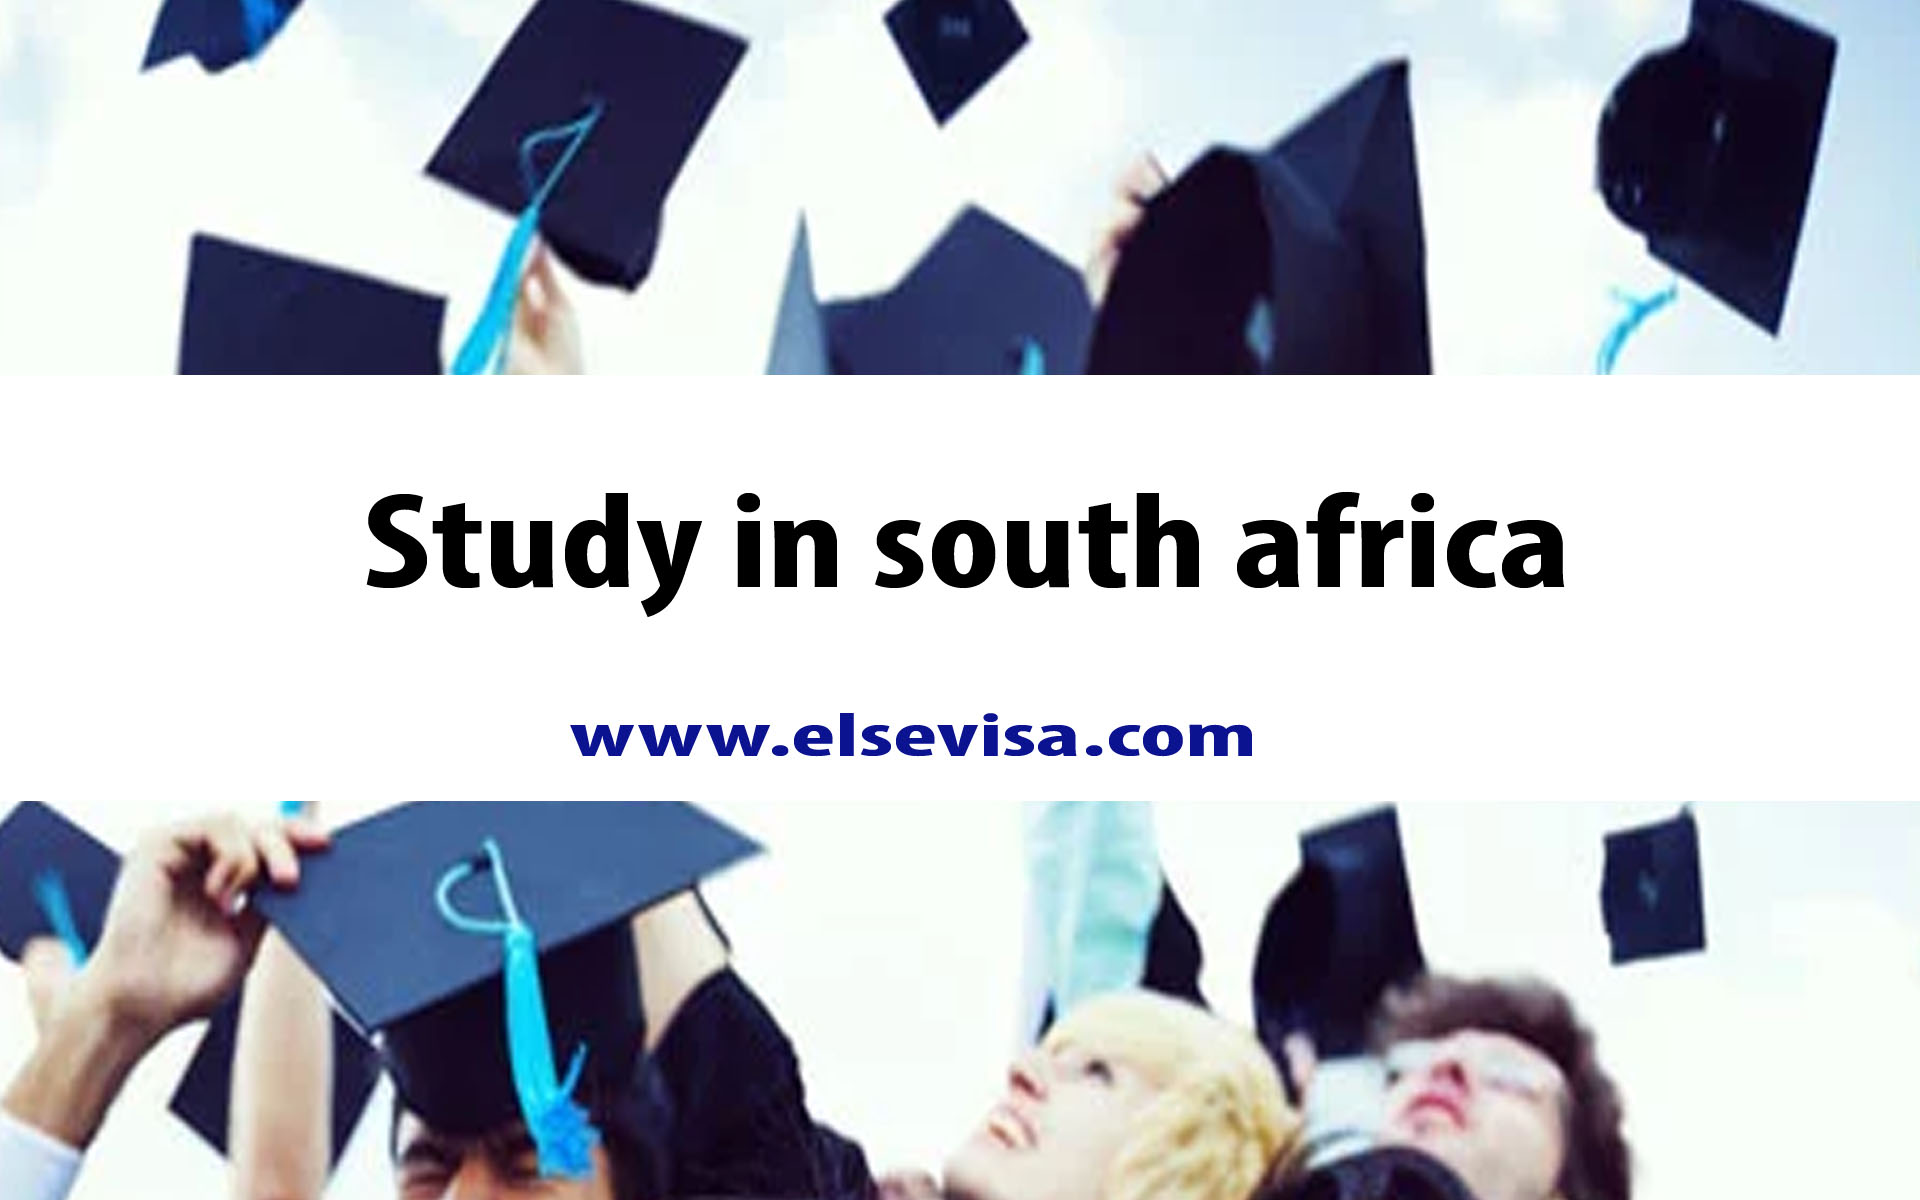 Study in south africa